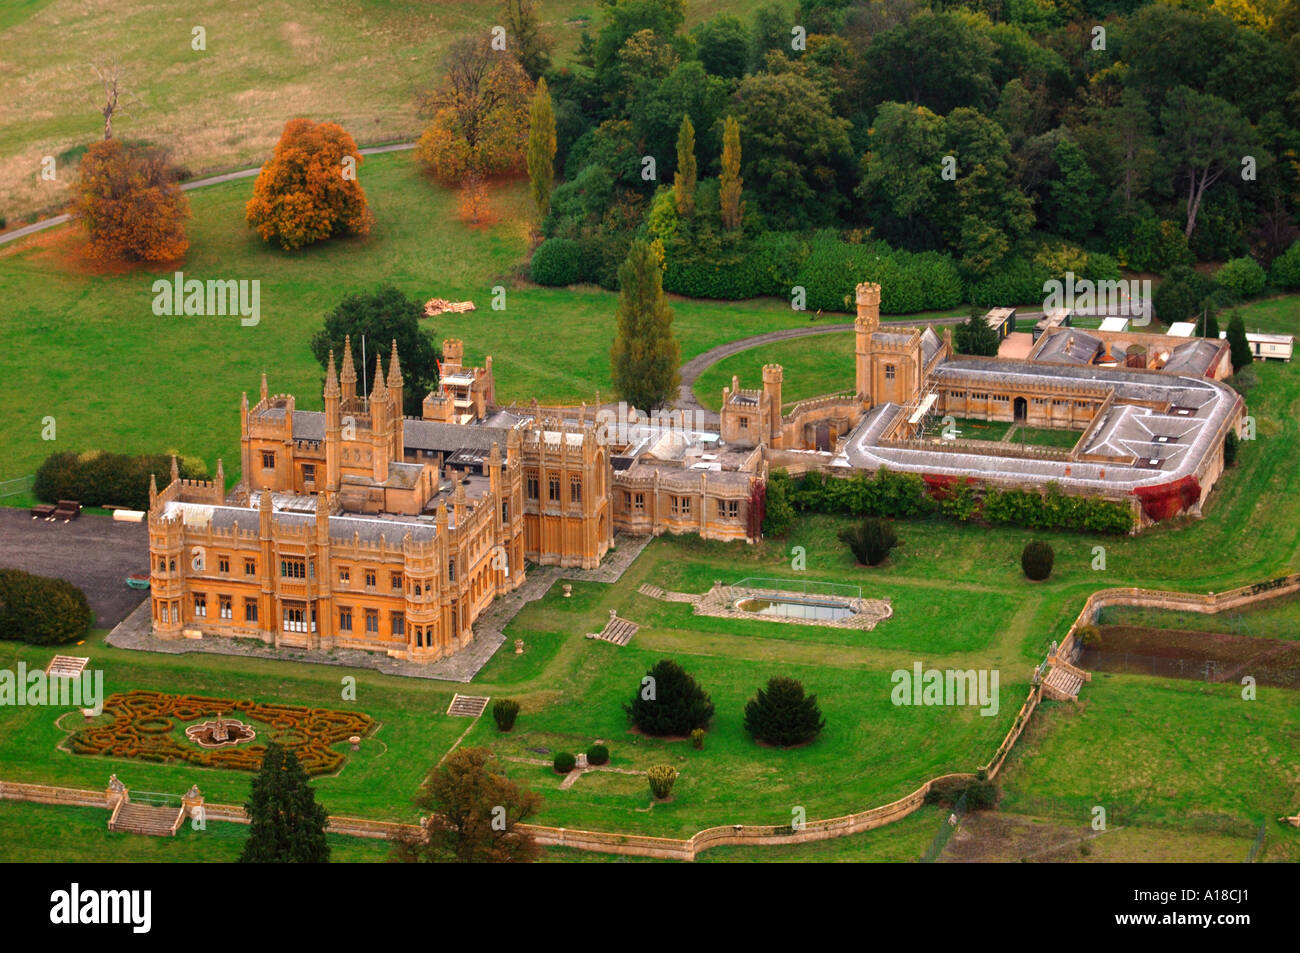 TODDINGTON MANOR IN GLOUCESTERSHIRE UK WHICH HAS BEEN BOUGHT BY THE ARTIST DAMIEN HIRST TO HOUSE HIS ART COLLECTION Stock Photo - Alamy